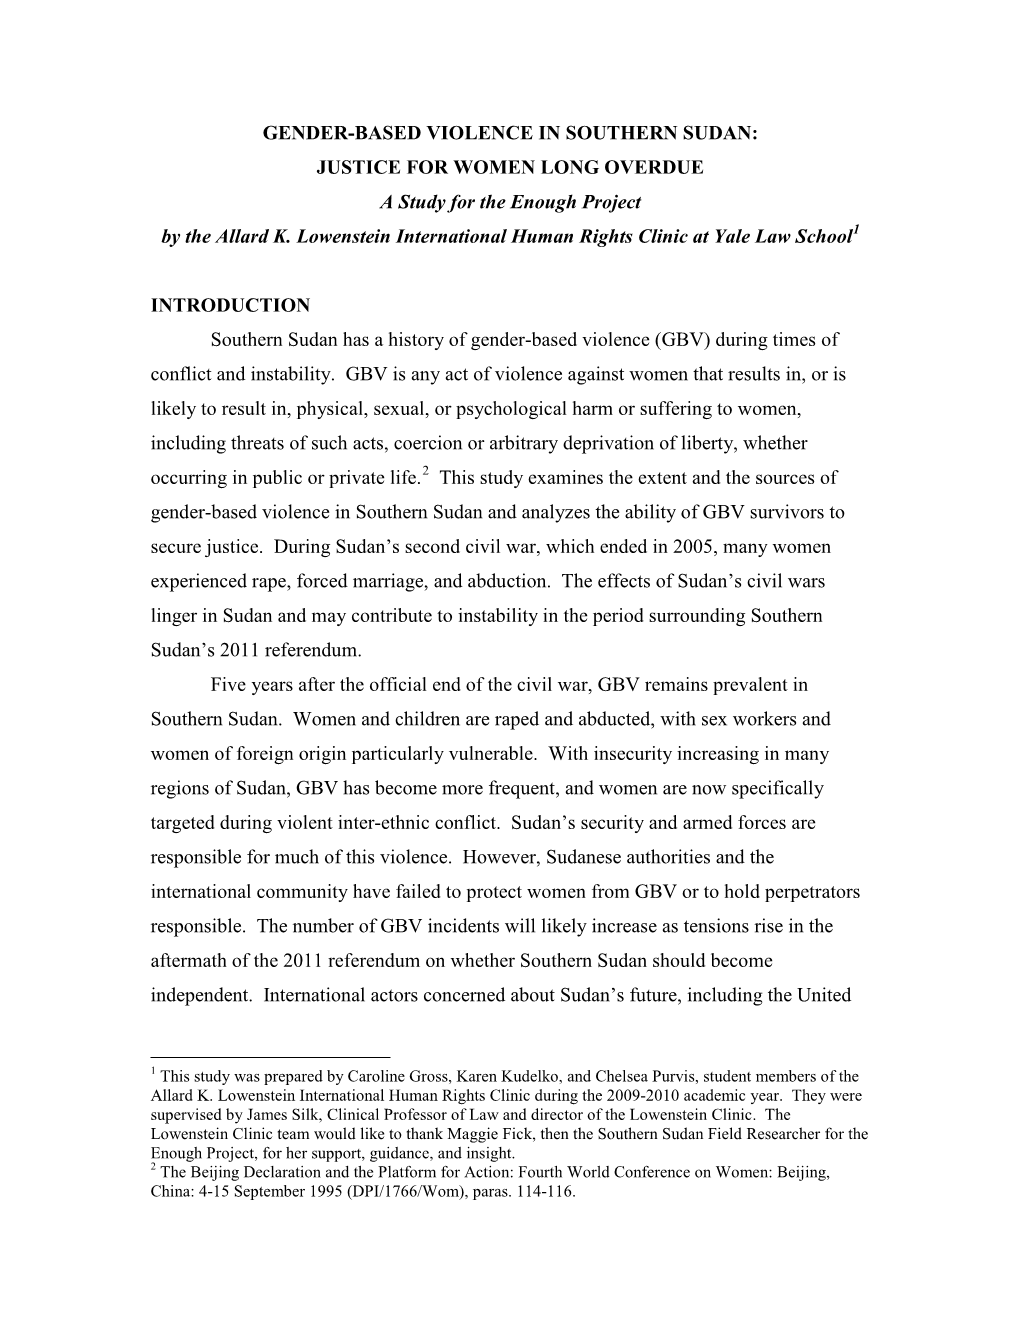 GENDER-BASED VIOLENCE in SOUTHERN SUDAN: JUSTICE for WOMEN LONG OVERDUE a Study for the Enough Project by the Allard K